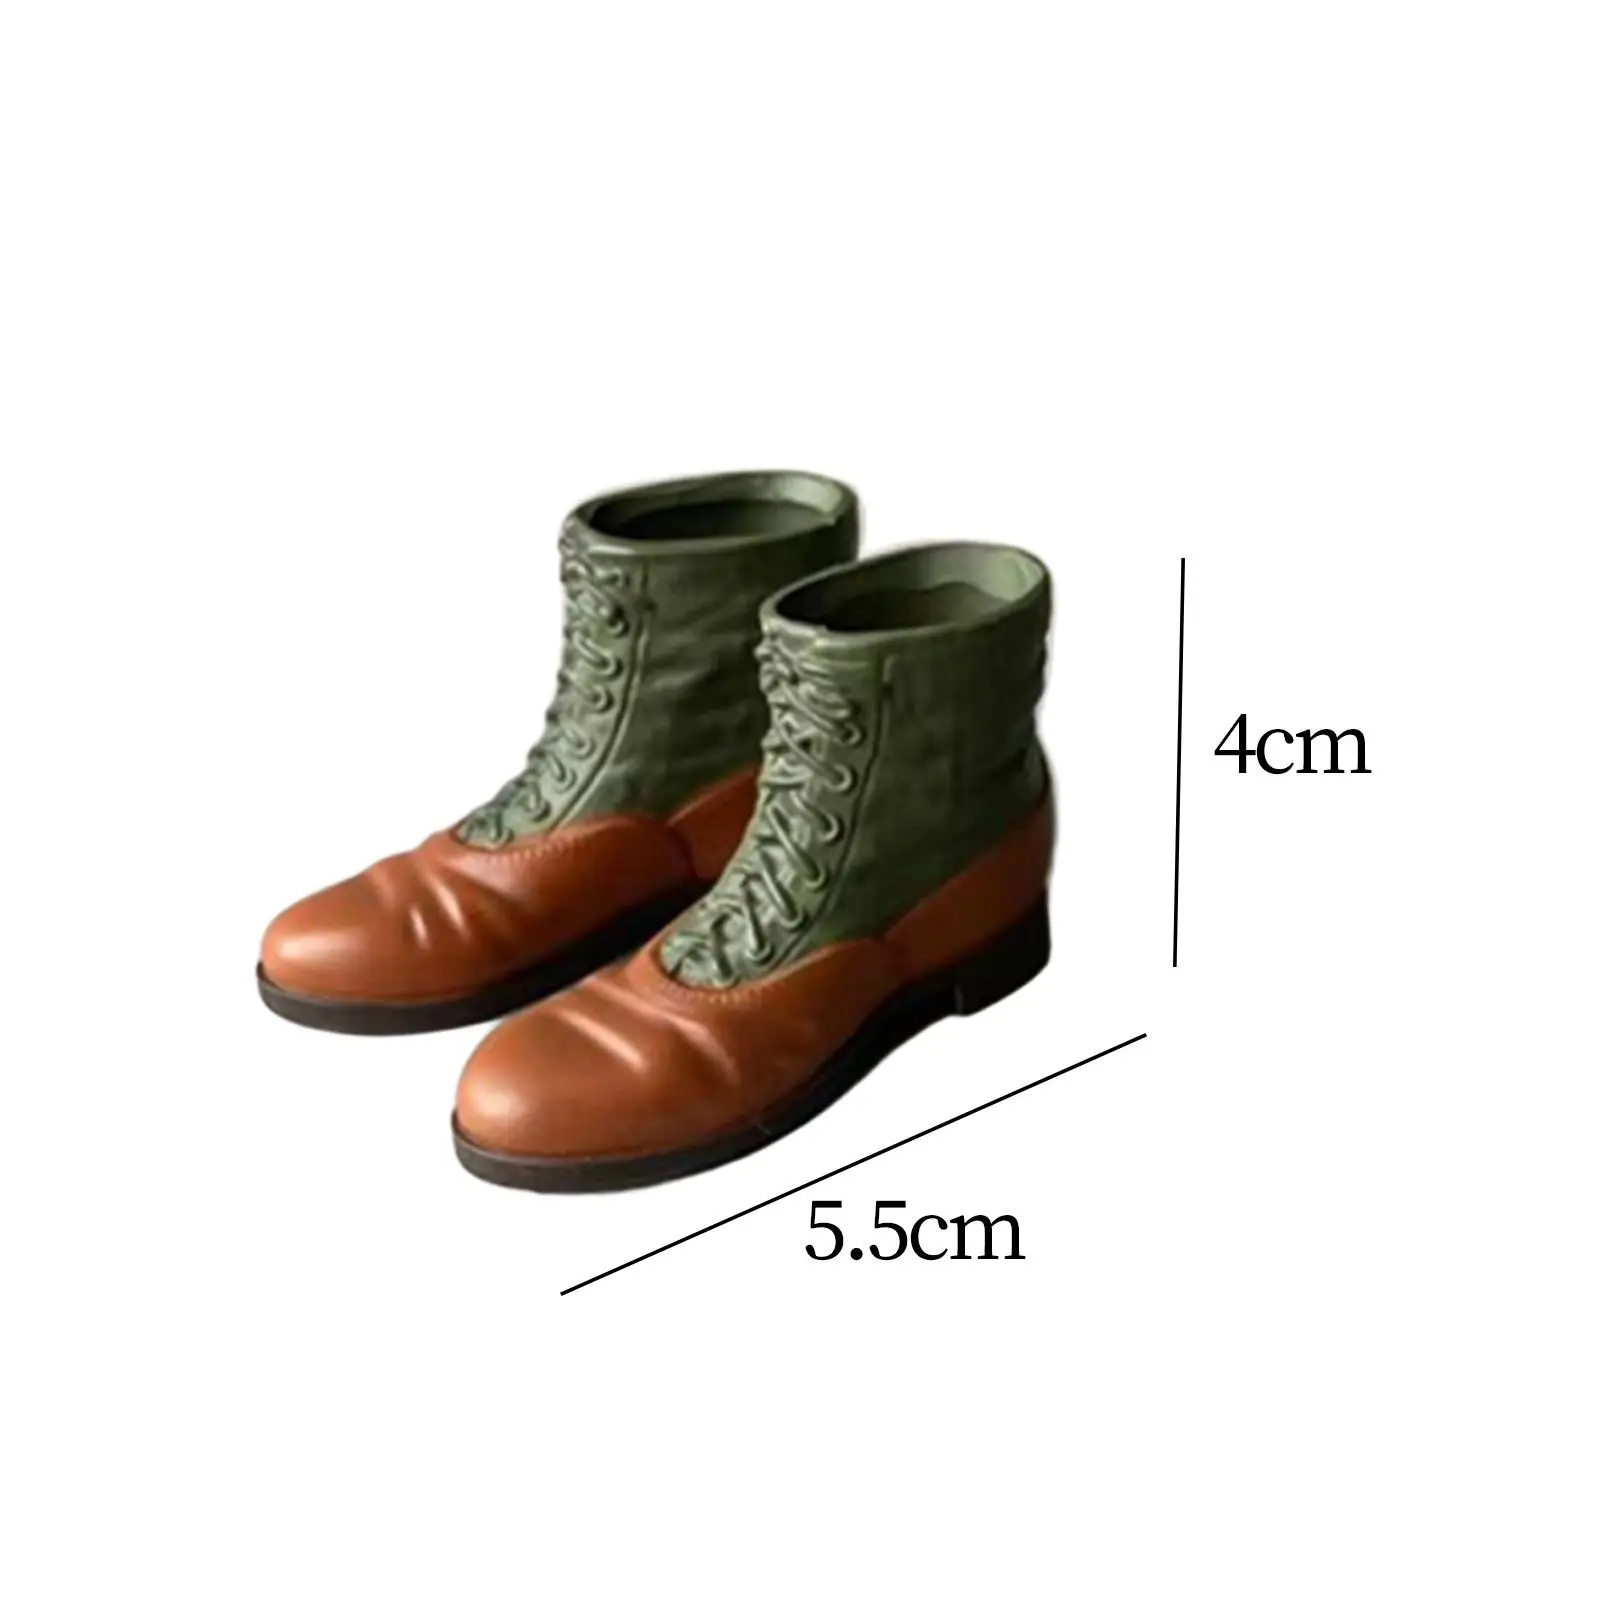 Action Figures Shoes 1/6 Scale Boots Female Action Figure Fashion Doll Knight Boots Model Doll Toy for Study Room Bedroom